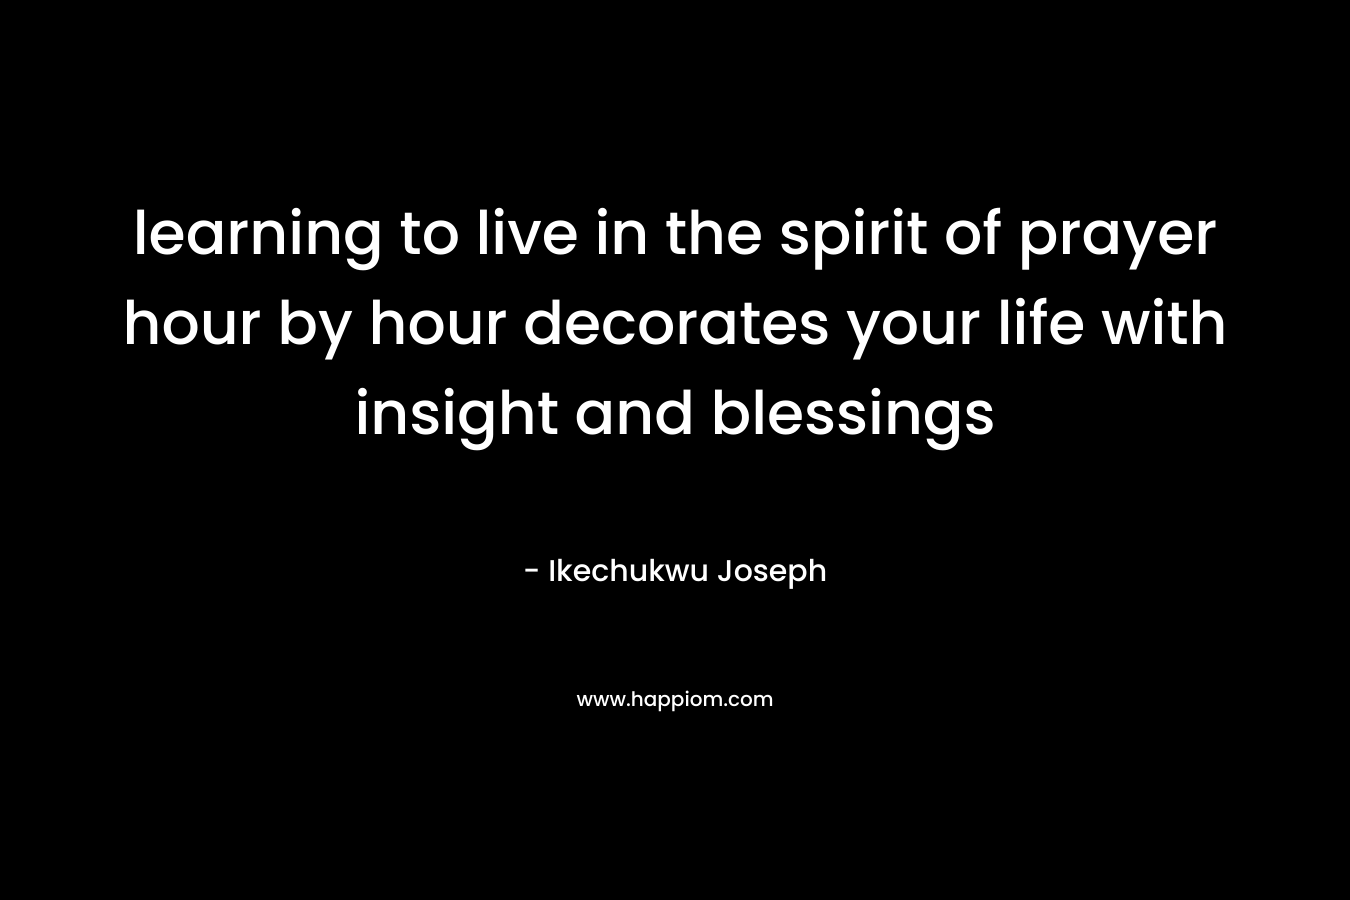 learning to live in the spirit of prayer hour by hour decorates your life with insight and blessings